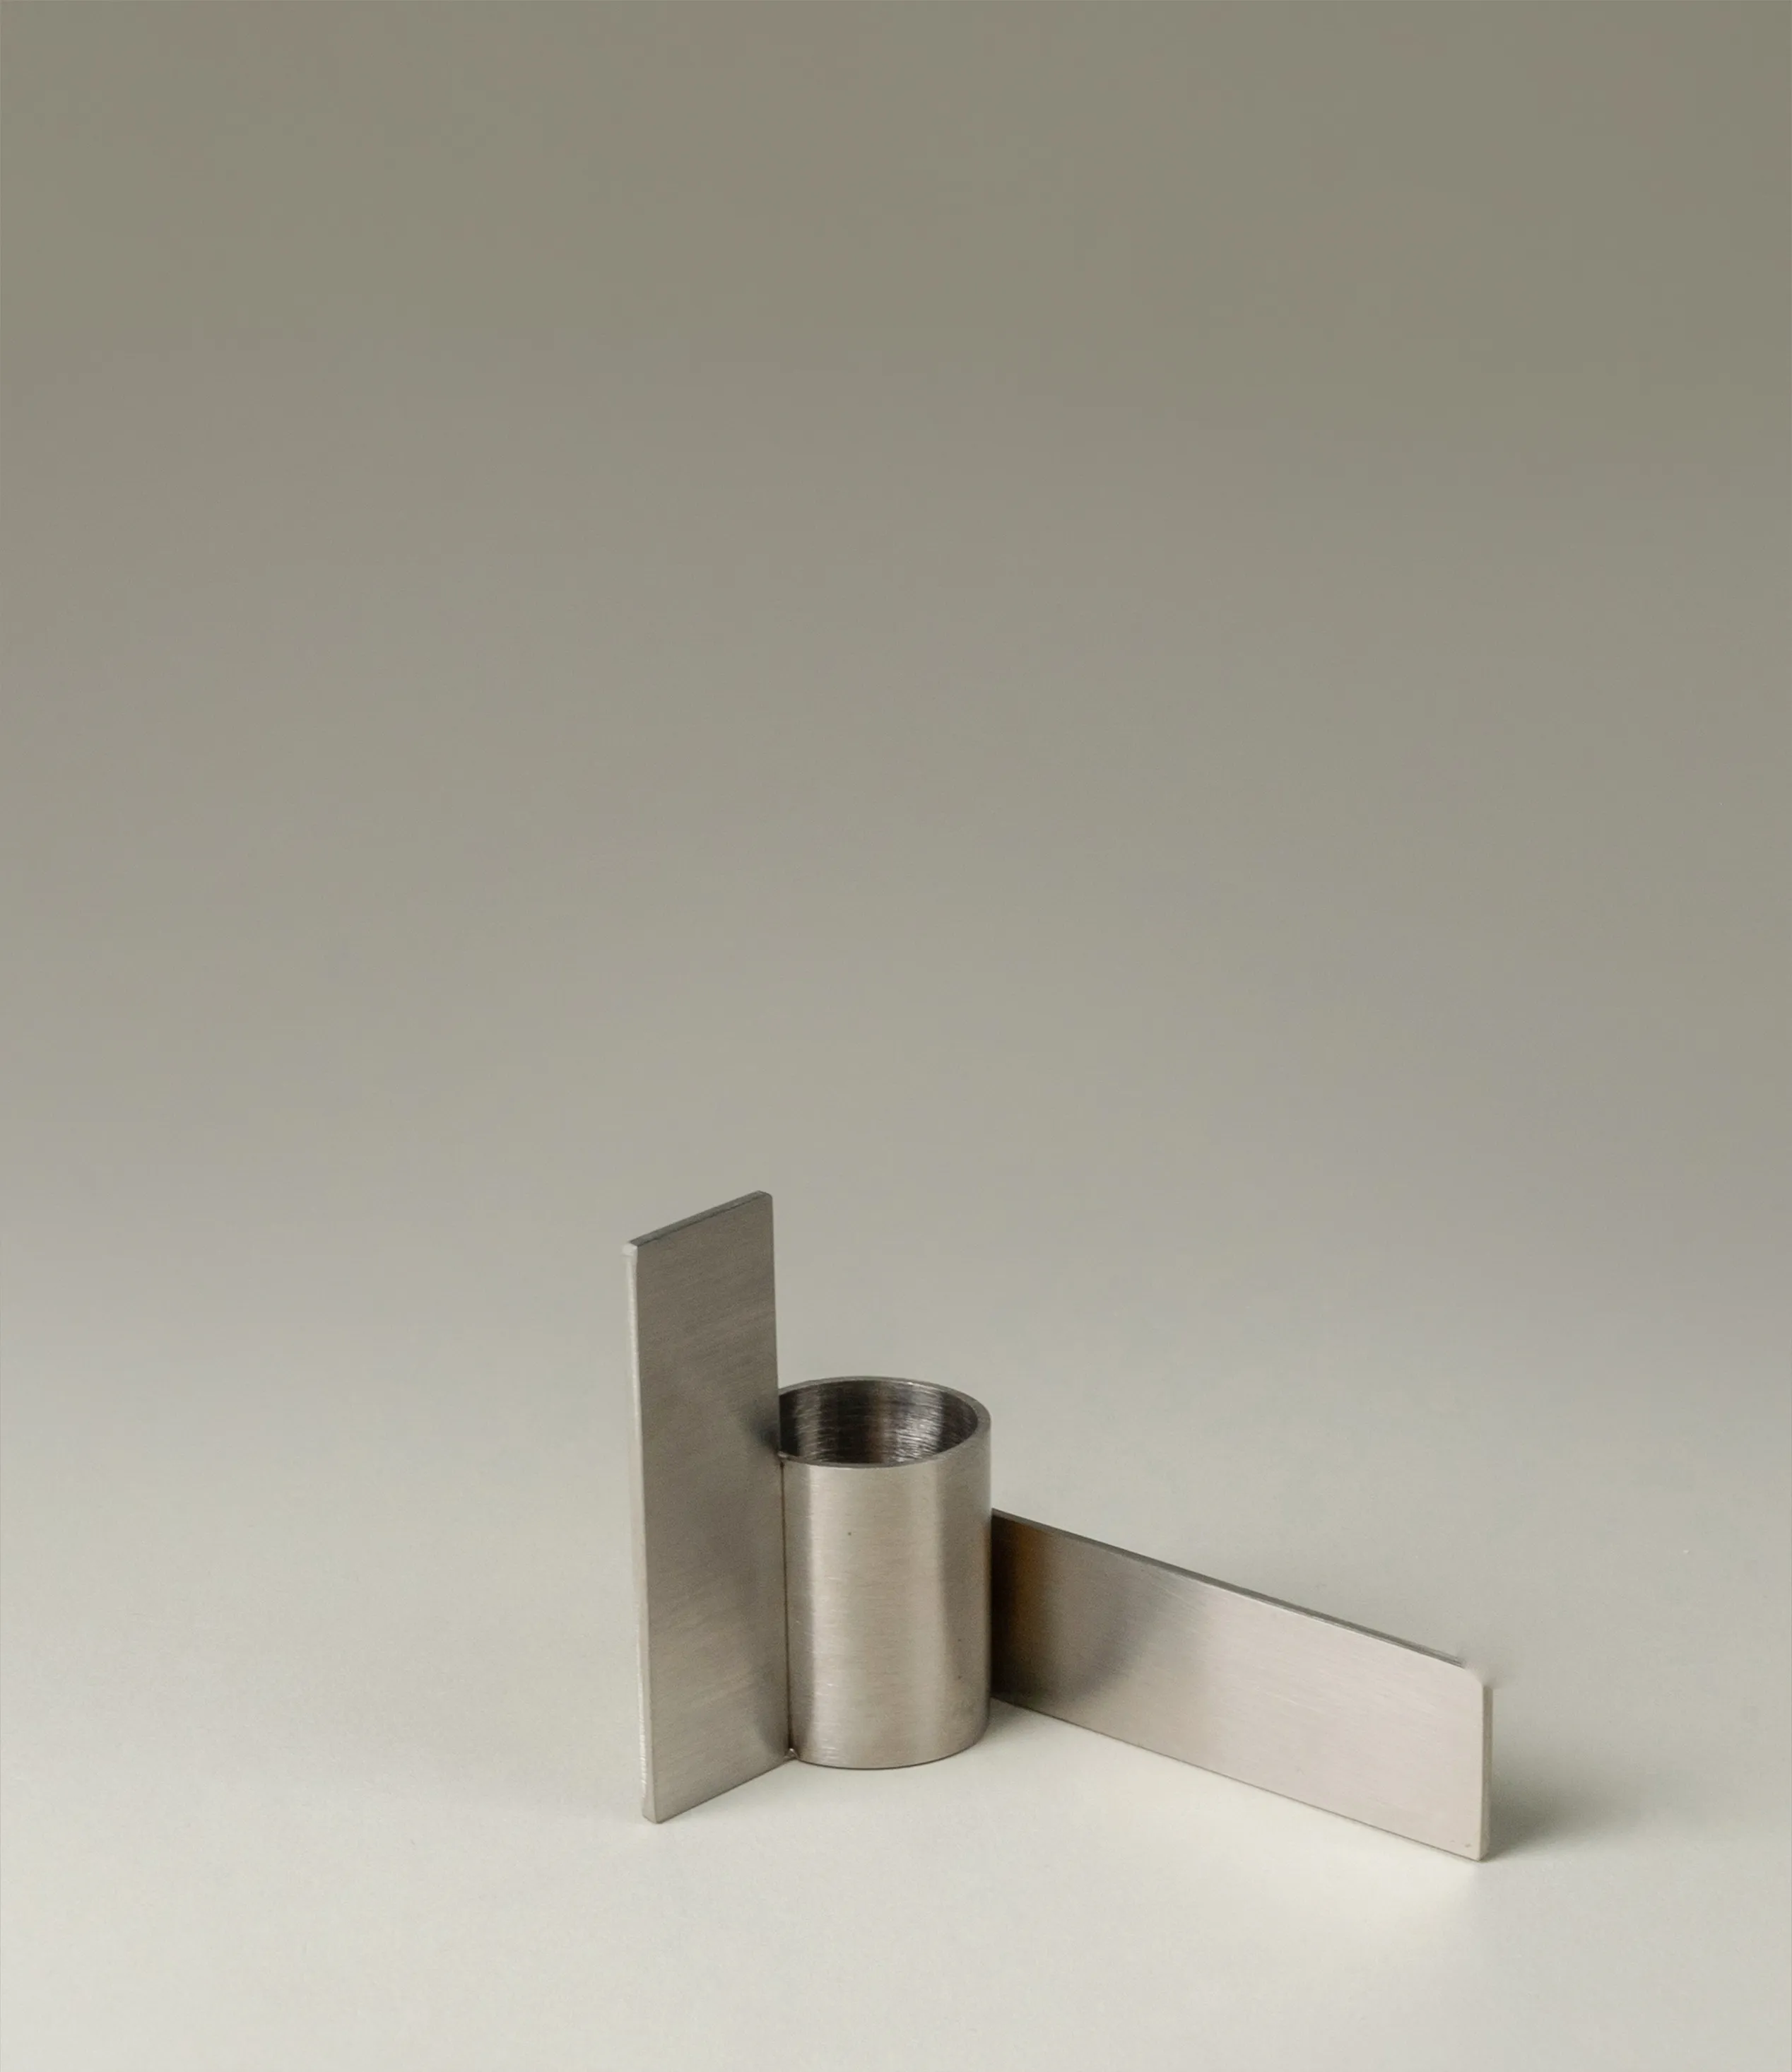 Icon Iysestage 02 from Stences is a candleholder made for taper candles. This picture shows the chrome variant of this item. The steel material has a brushed surface which emphasize the soft geometric shapes of the product in question. Perfect fit for your brutalist, minimalist home.